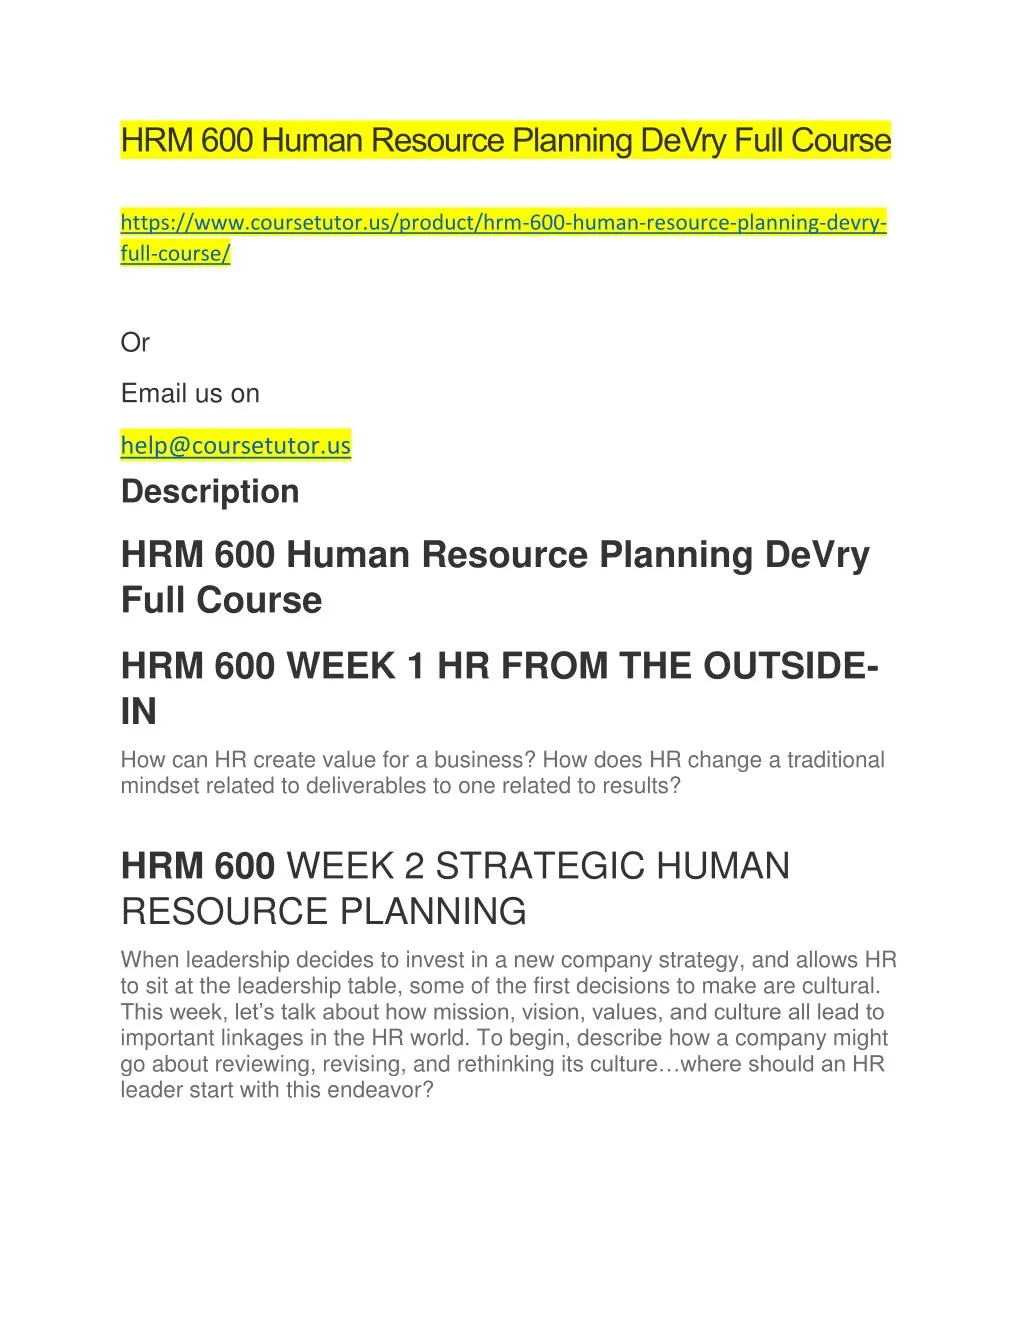 hrm 600 human resource planning devry full course